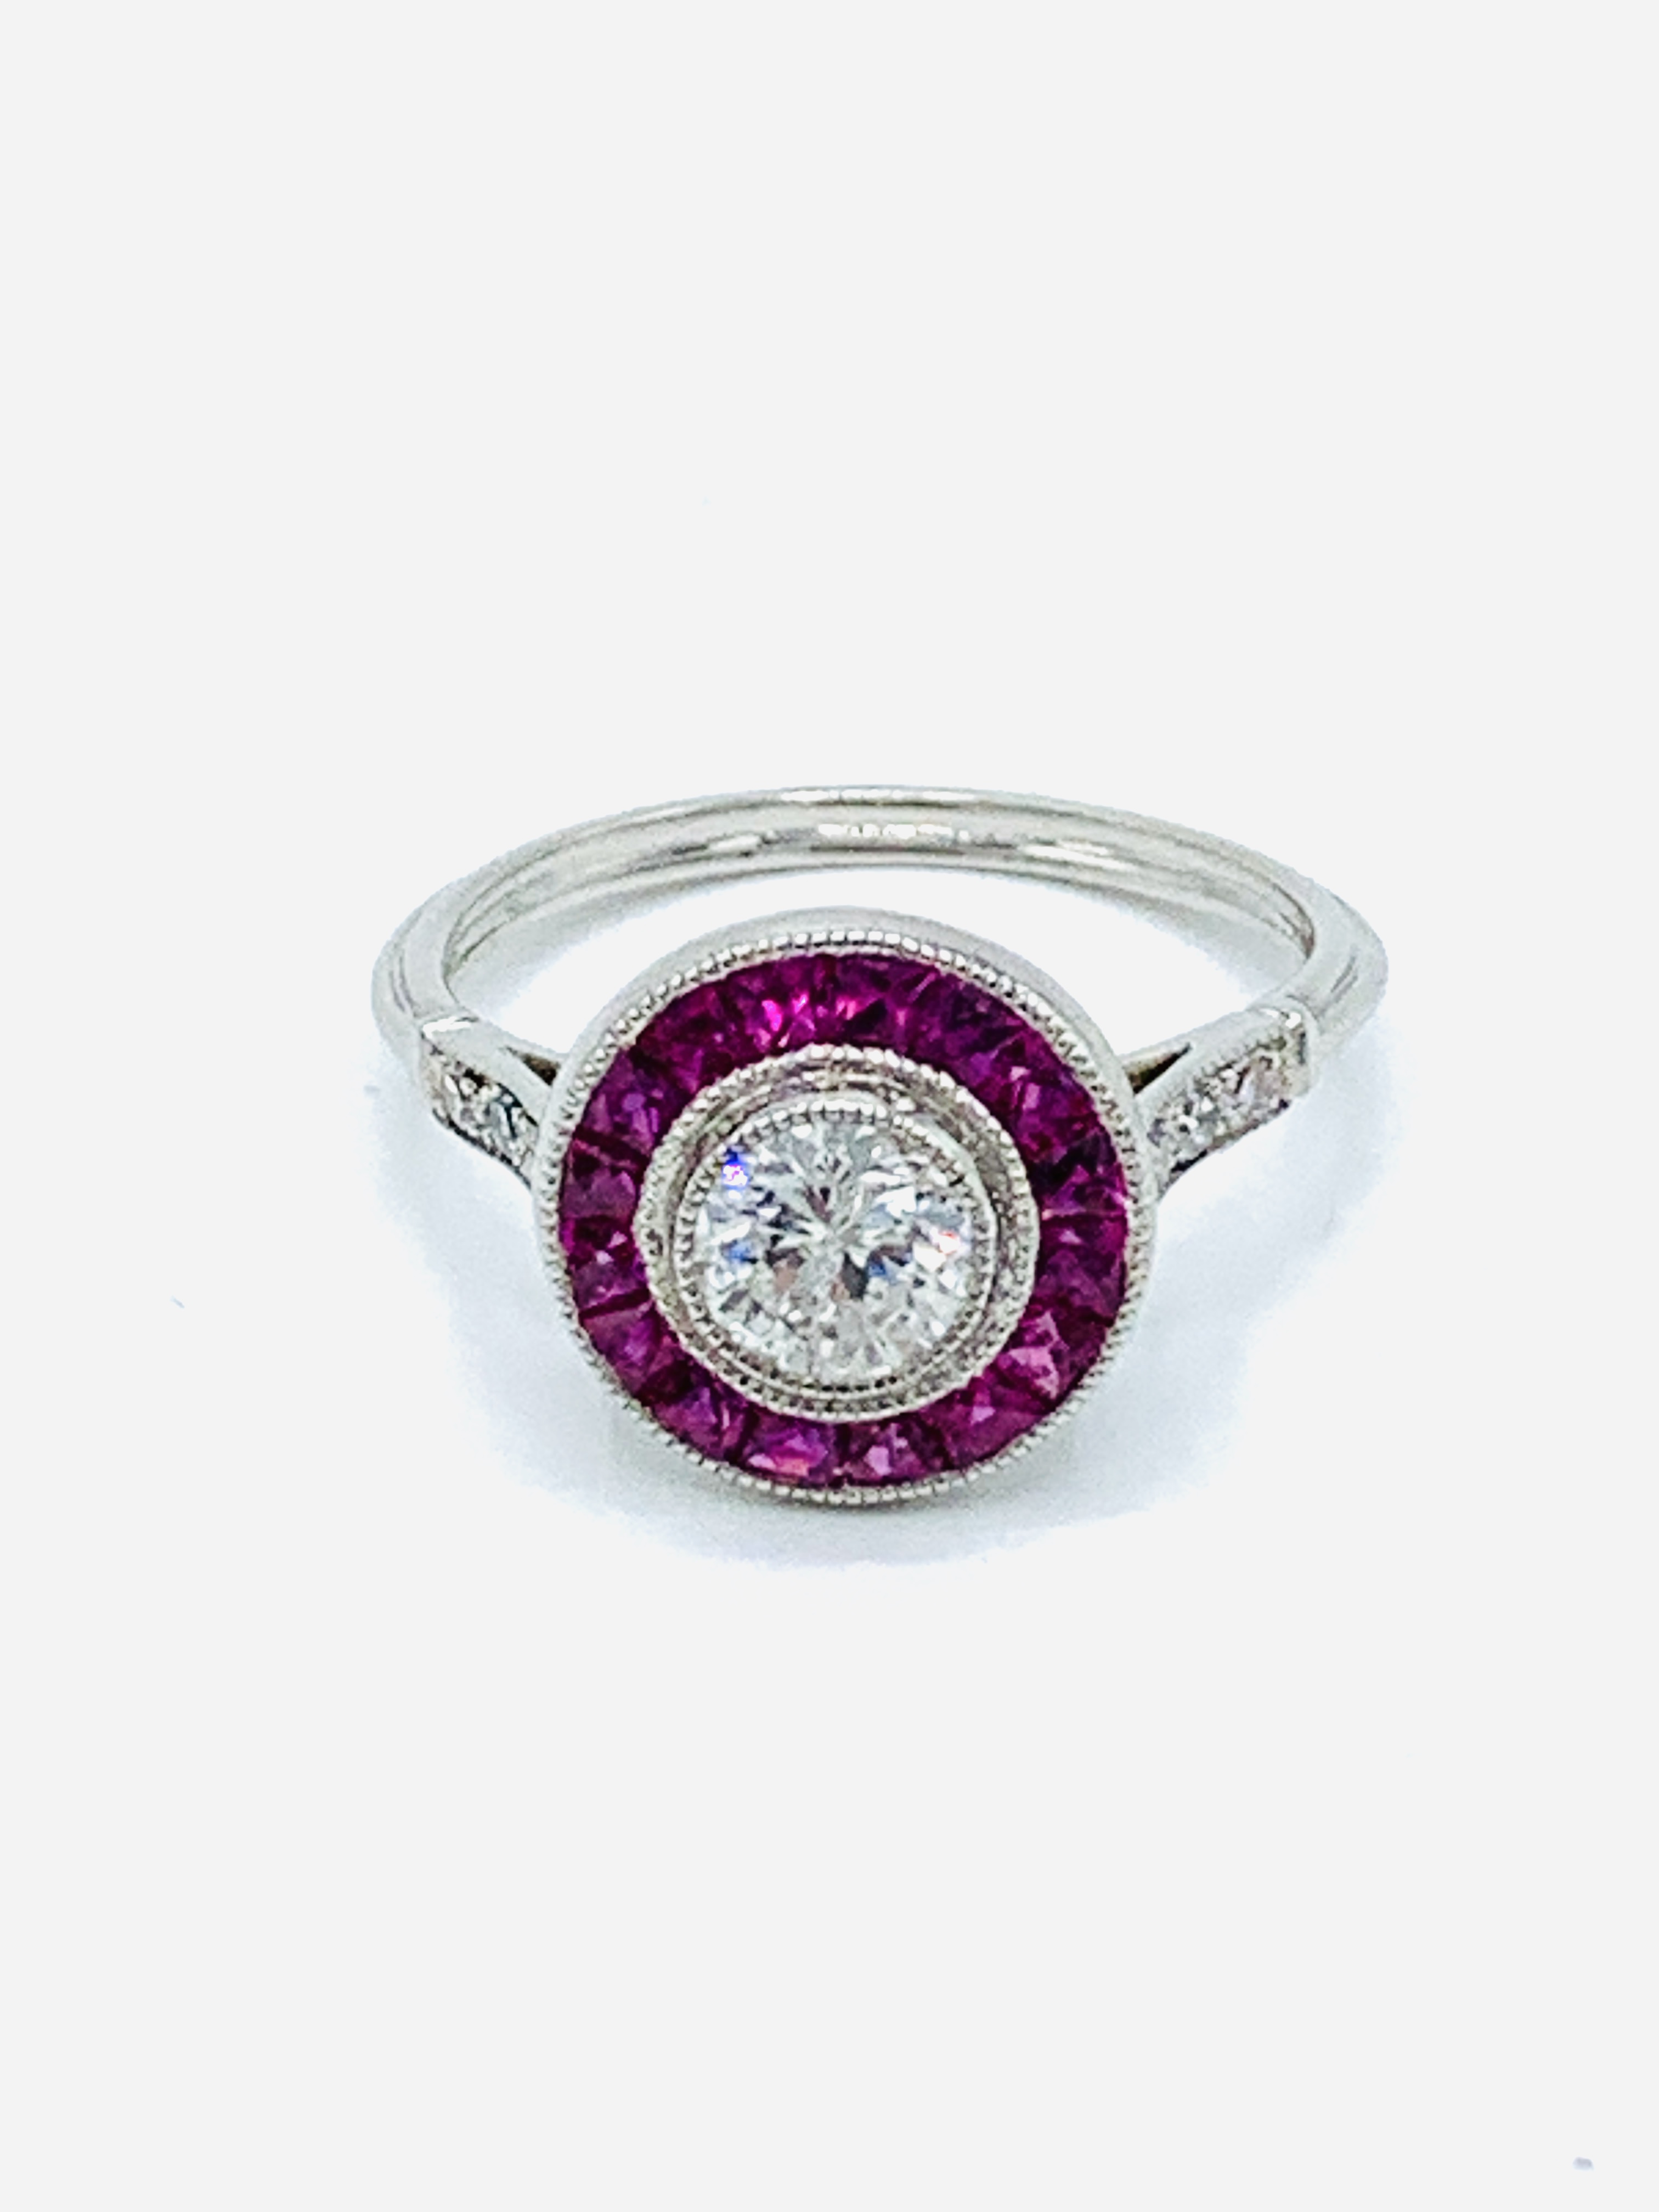 White gold and ruby target ring. - Image 2 of 4